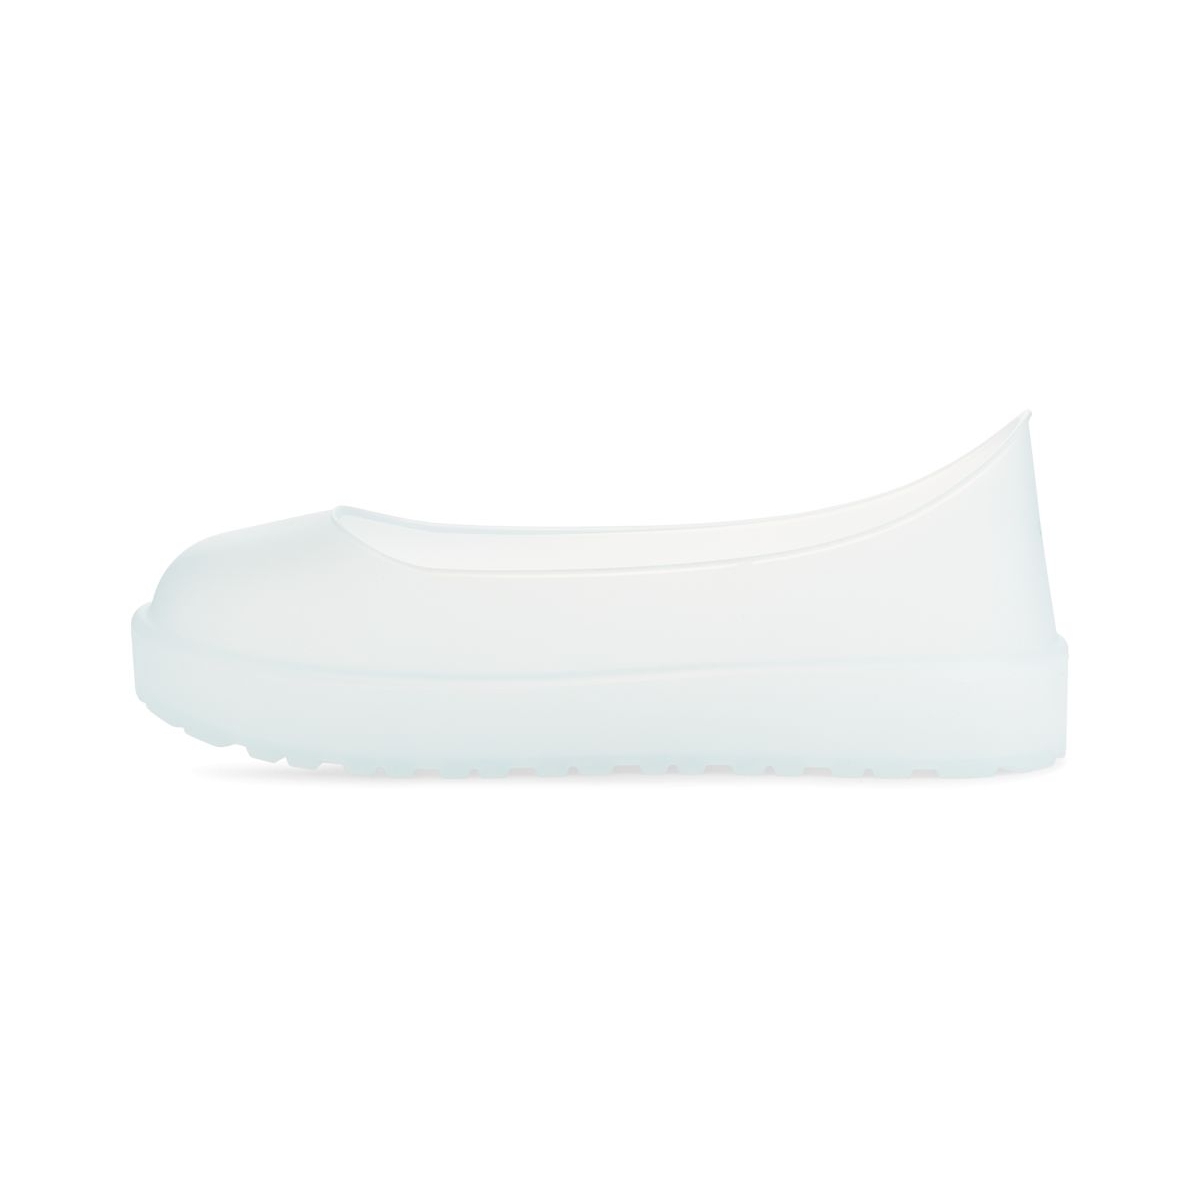 UGG Unisex Boot Guard Silicone Rubber Galosh Clear - 1129431-CLR CLEAR - CLEAR, XS